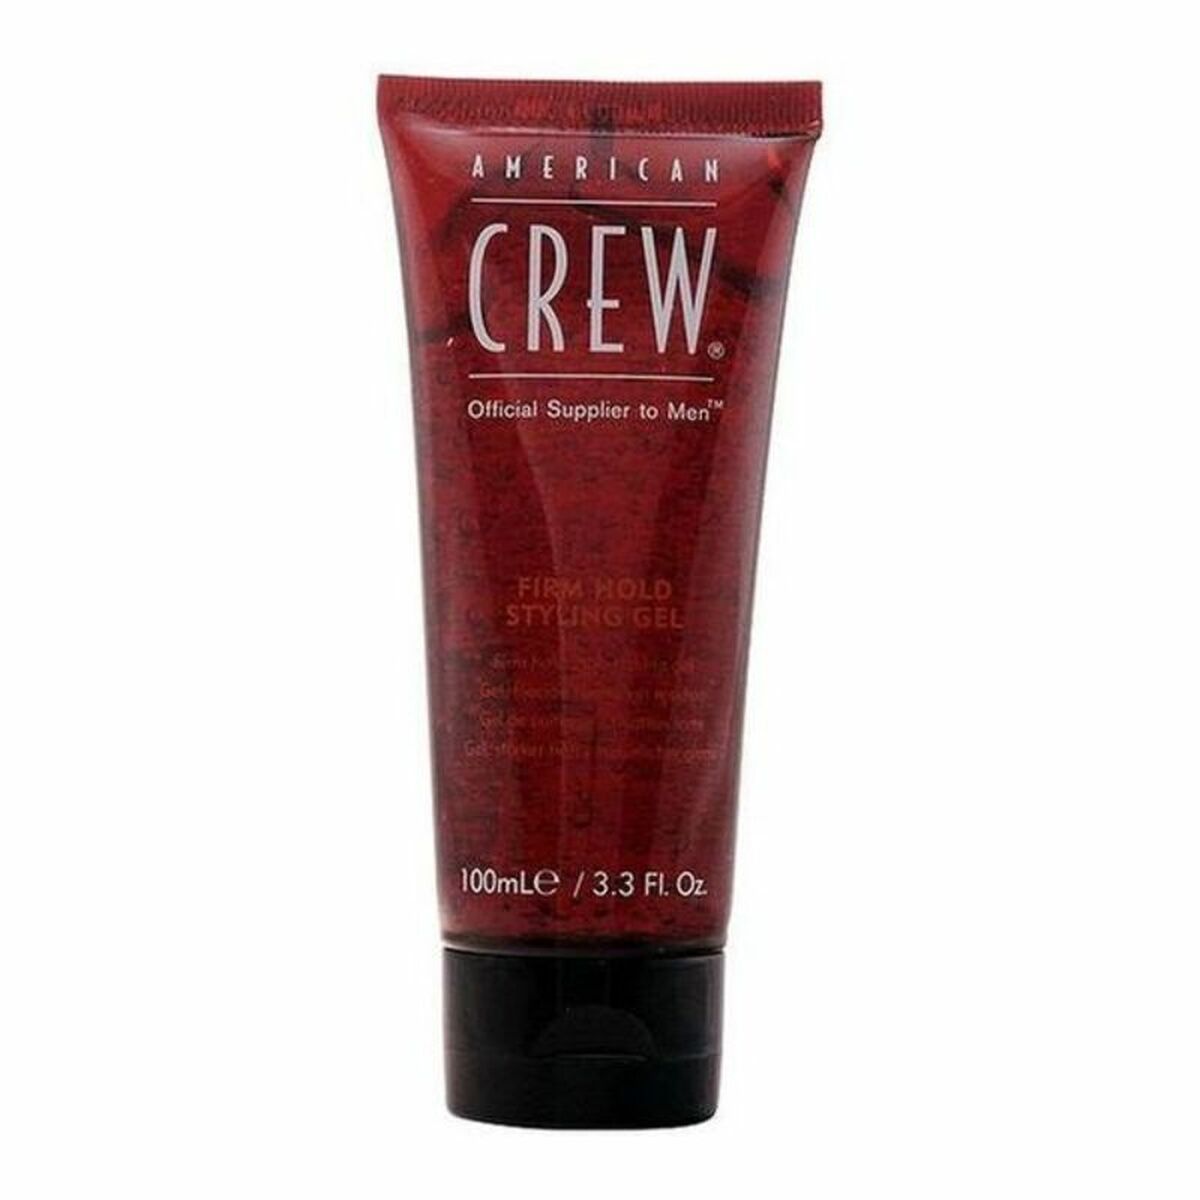 Styling Gel Firm Hold Styling American Crew 76033-0